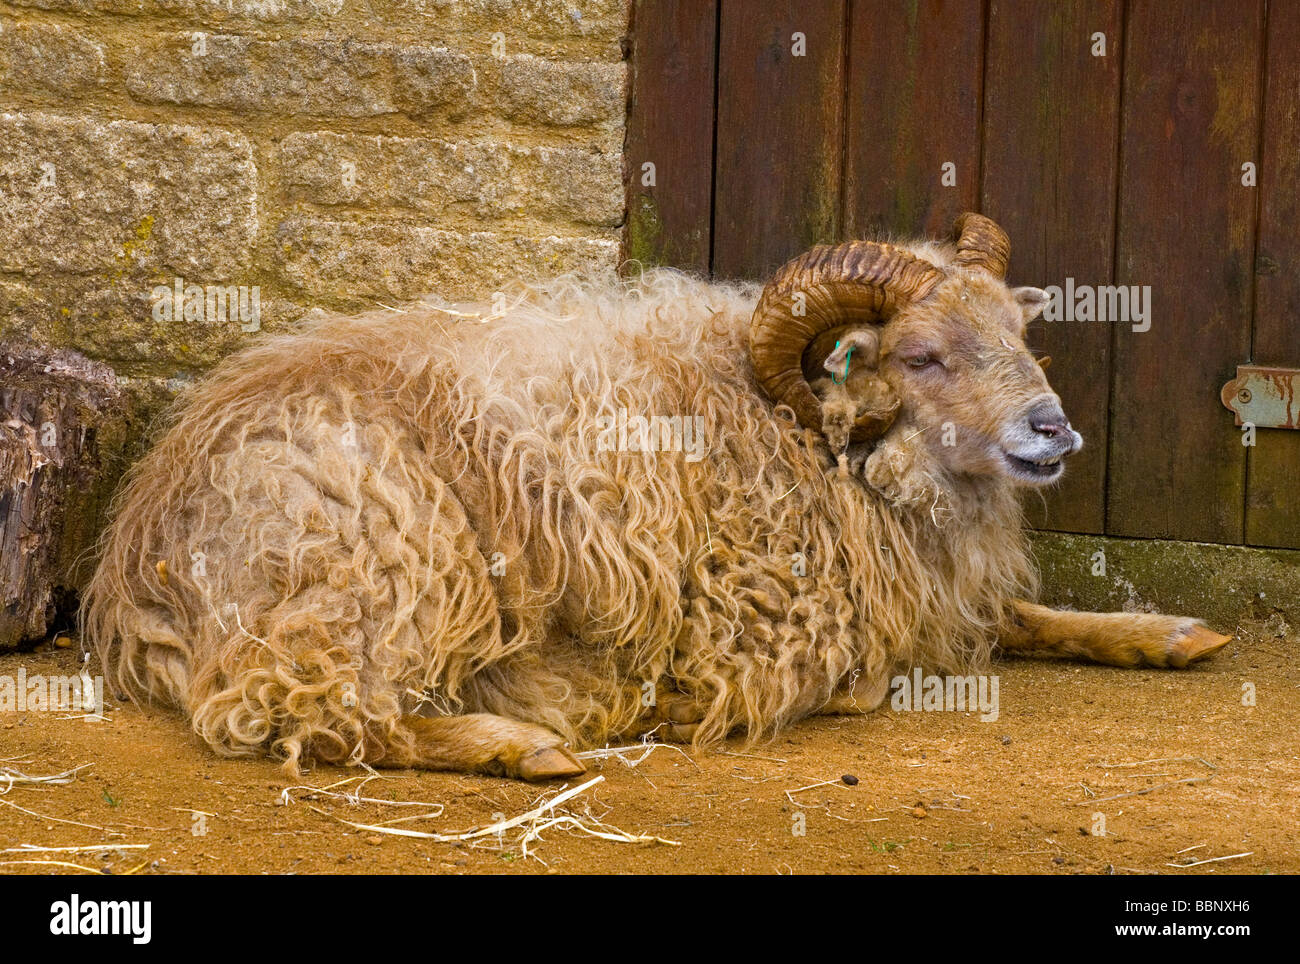 The Ouessant (or Ushant) is a breed of domestic sheep from the island of Ouessant off the coast of Britanny, France Stock Photo